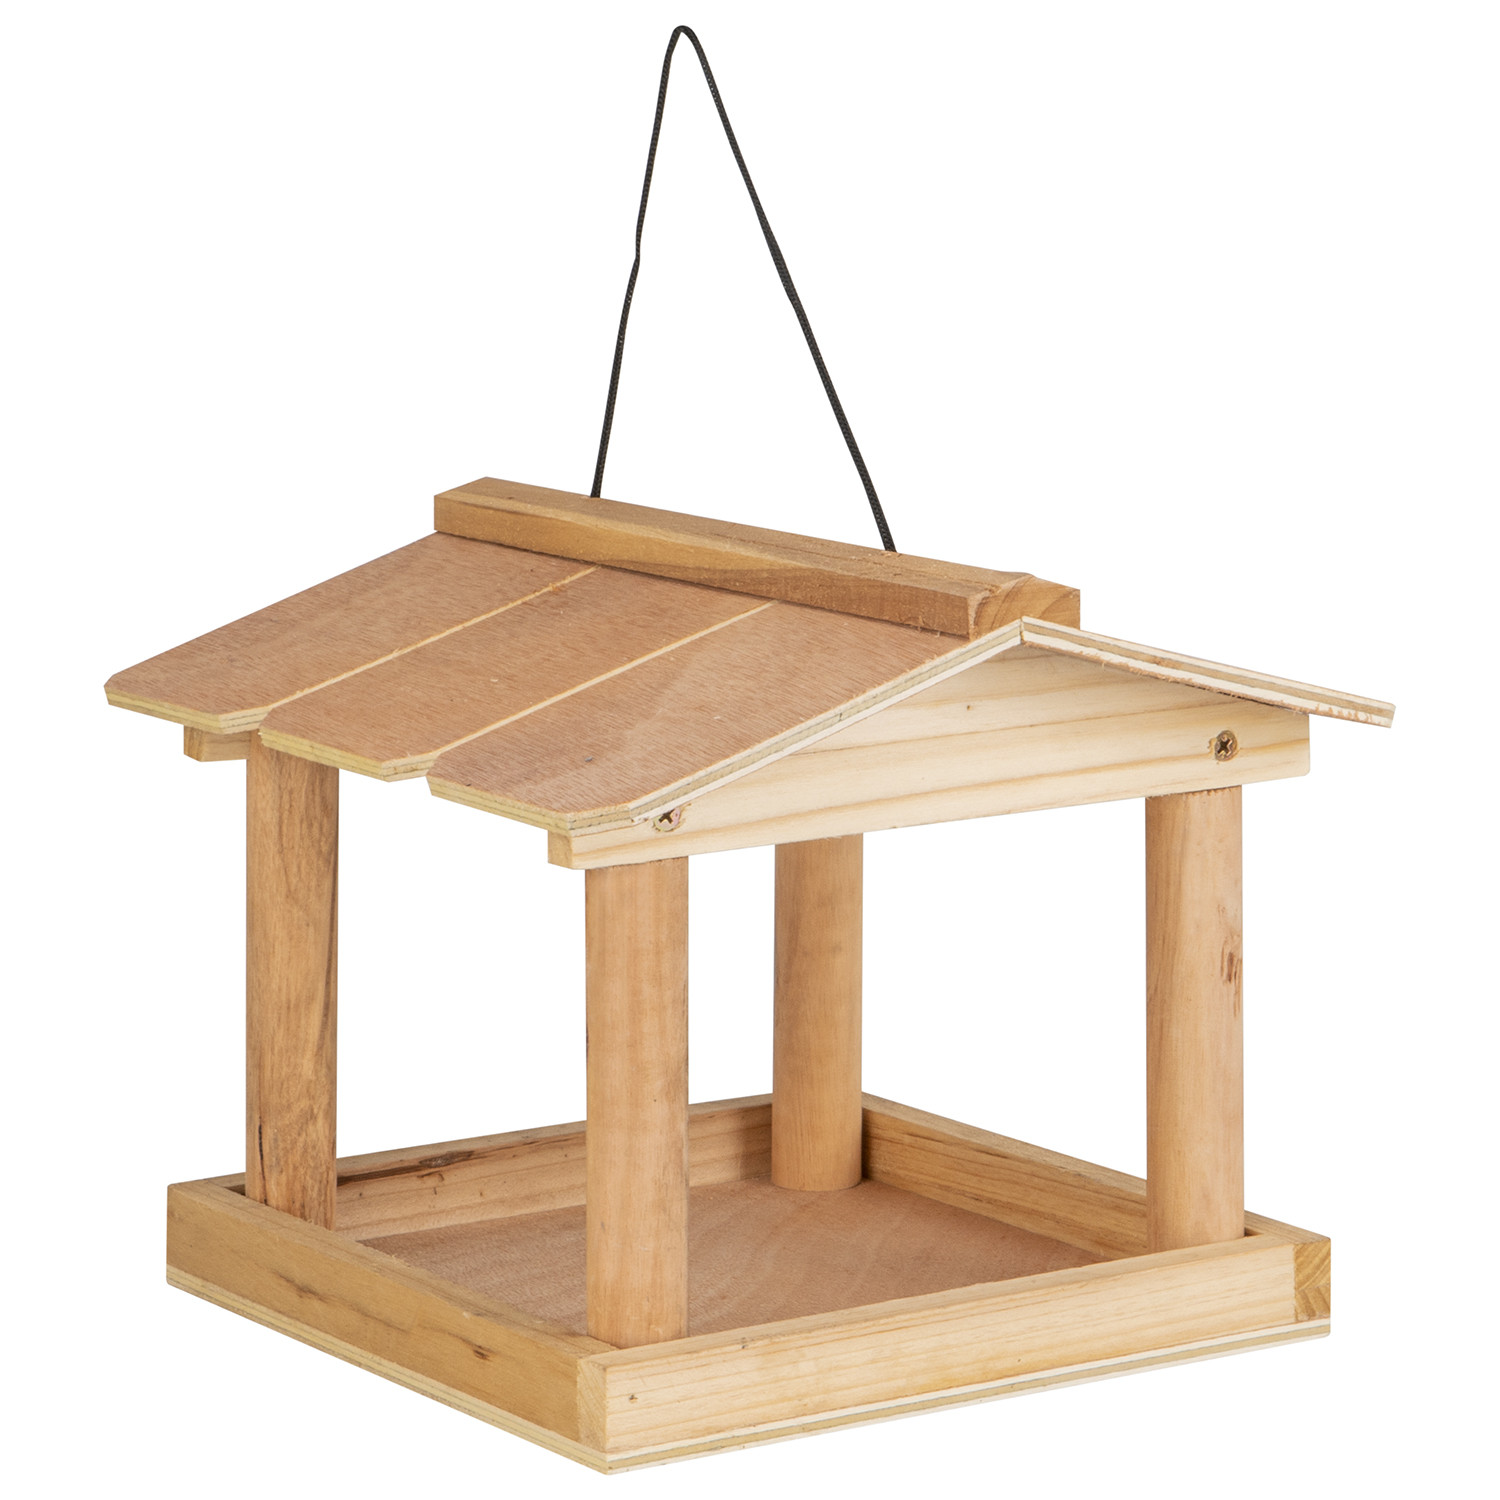 Nature's Market Wooden Hanging Bird Table Image 1